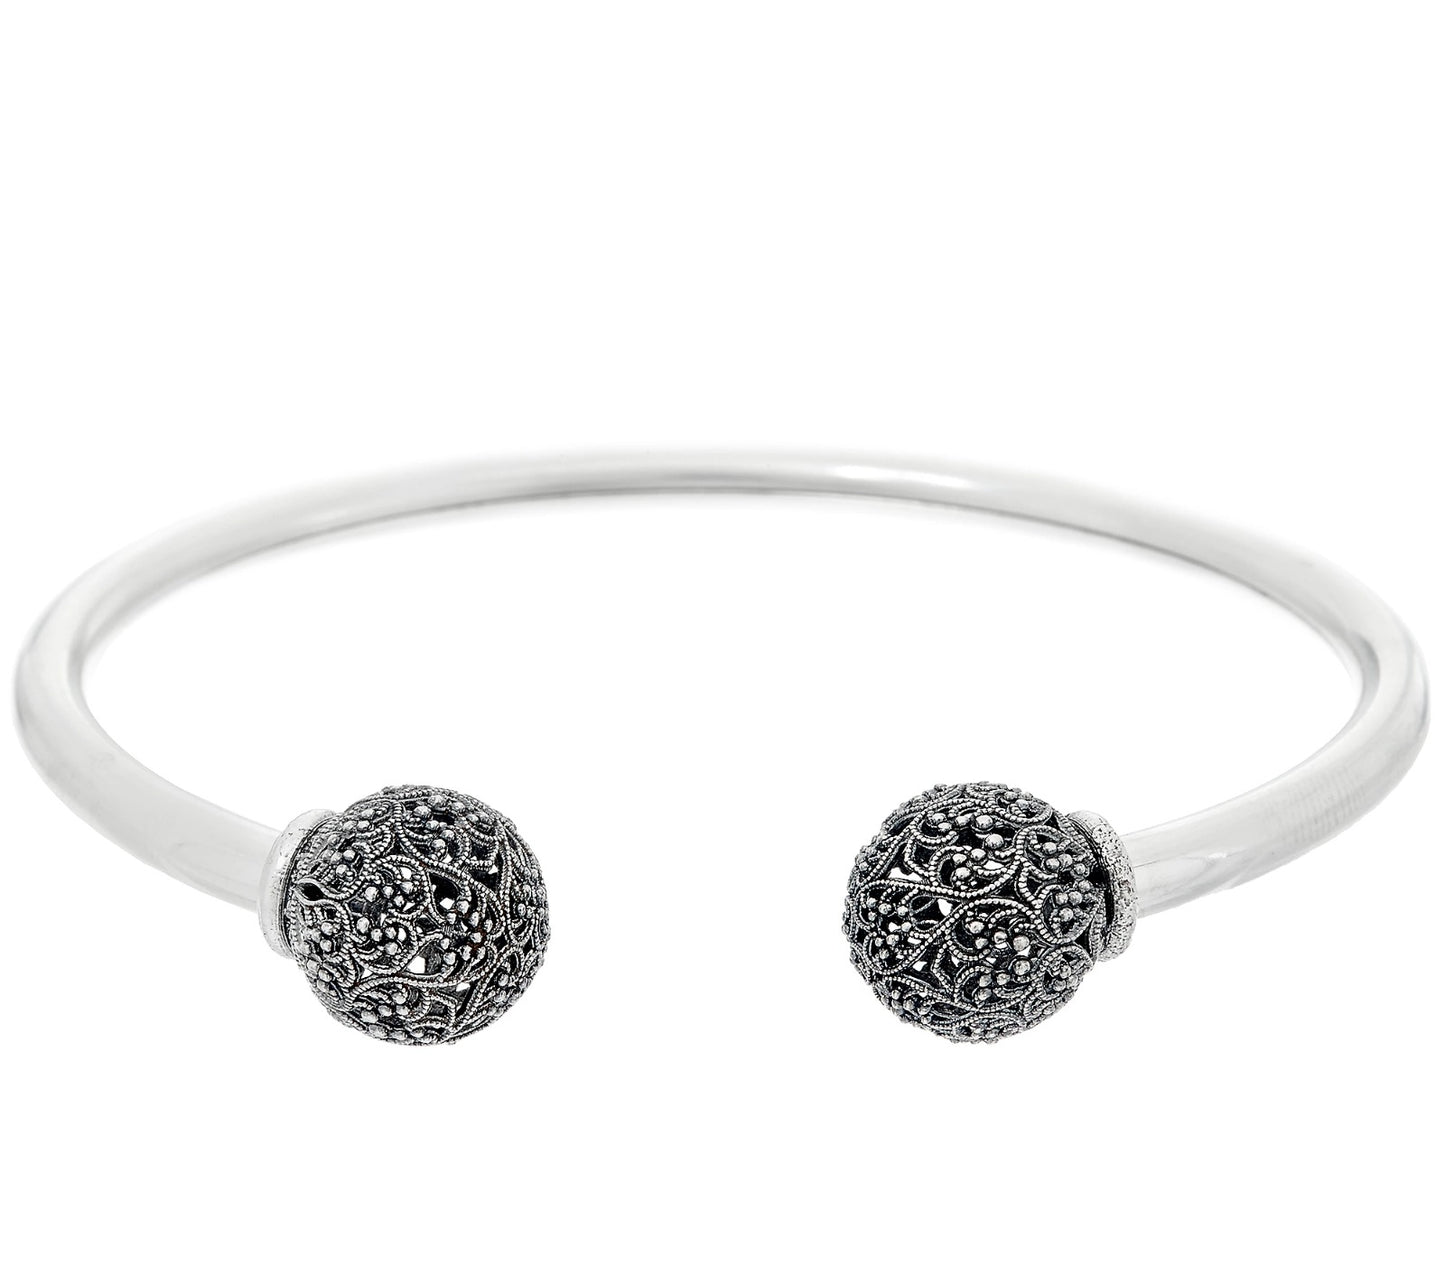 Or Paz Sterling Silver Lace 11.5Mm Bead Oxidized 6-3/4" Cuff Bracelet 10.5G Qvc